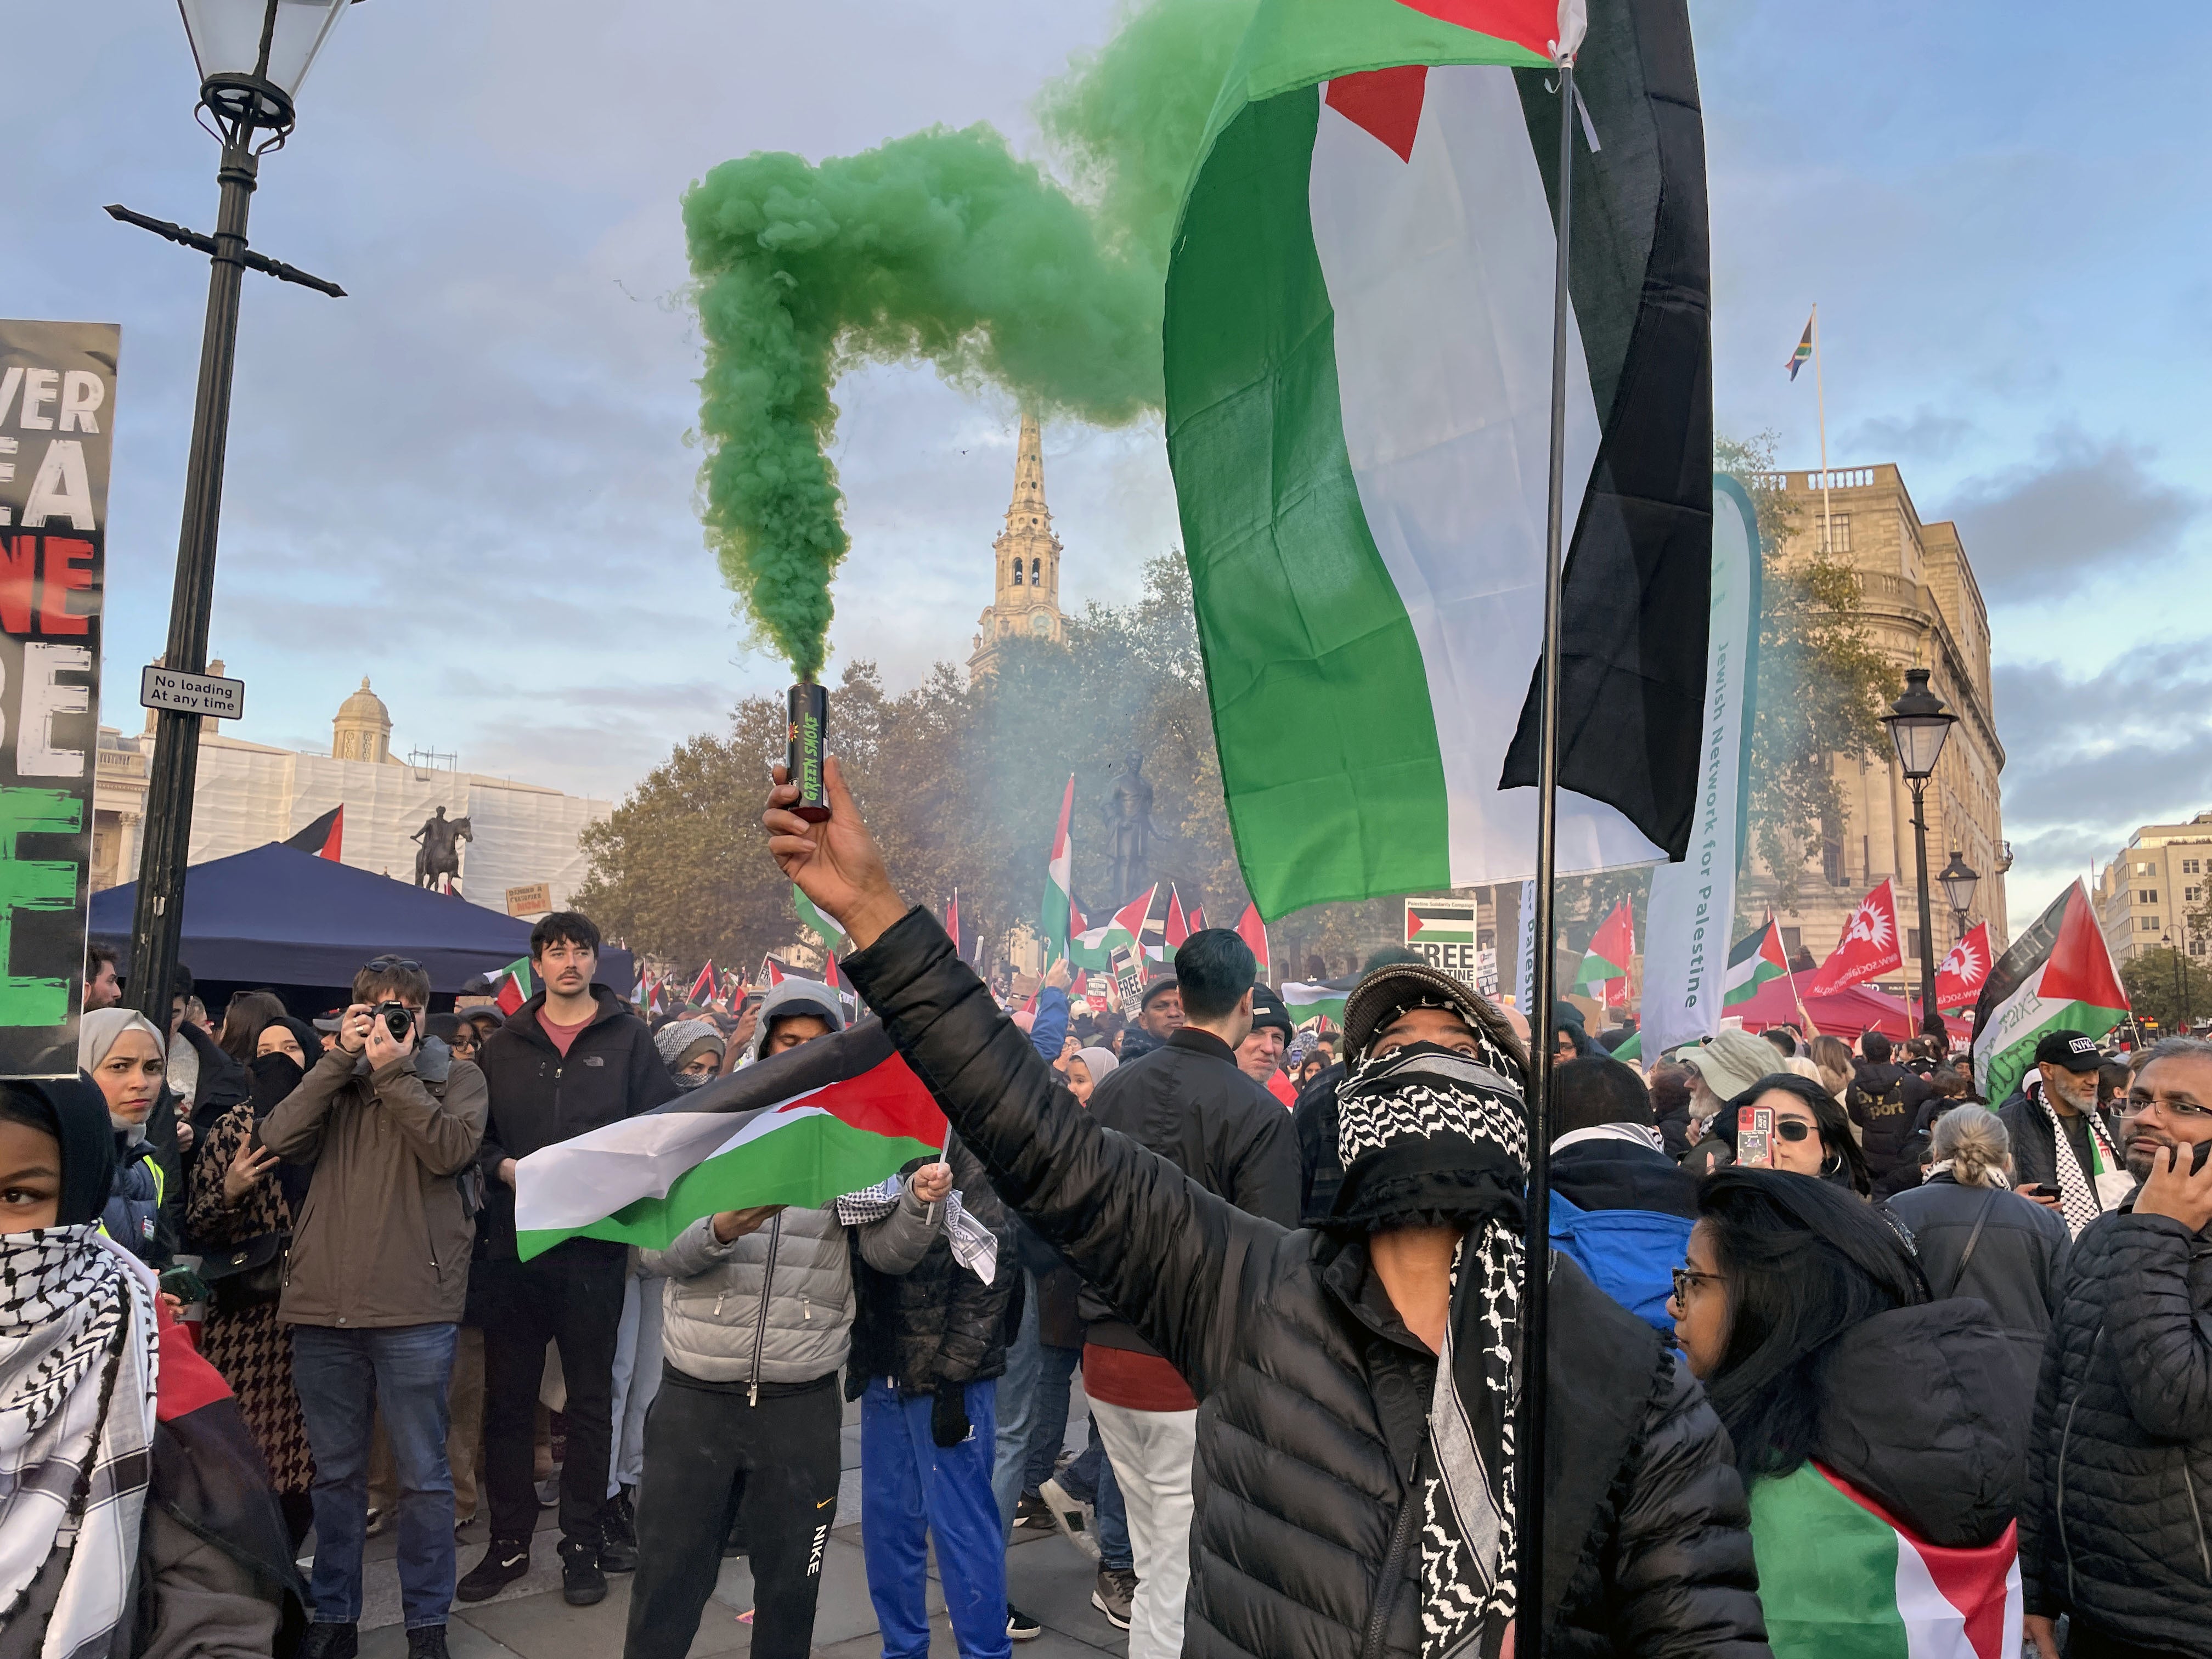 Tens of thousands of people gathered as they carried flags and banners to demonstrate solidarity with the Palestinians